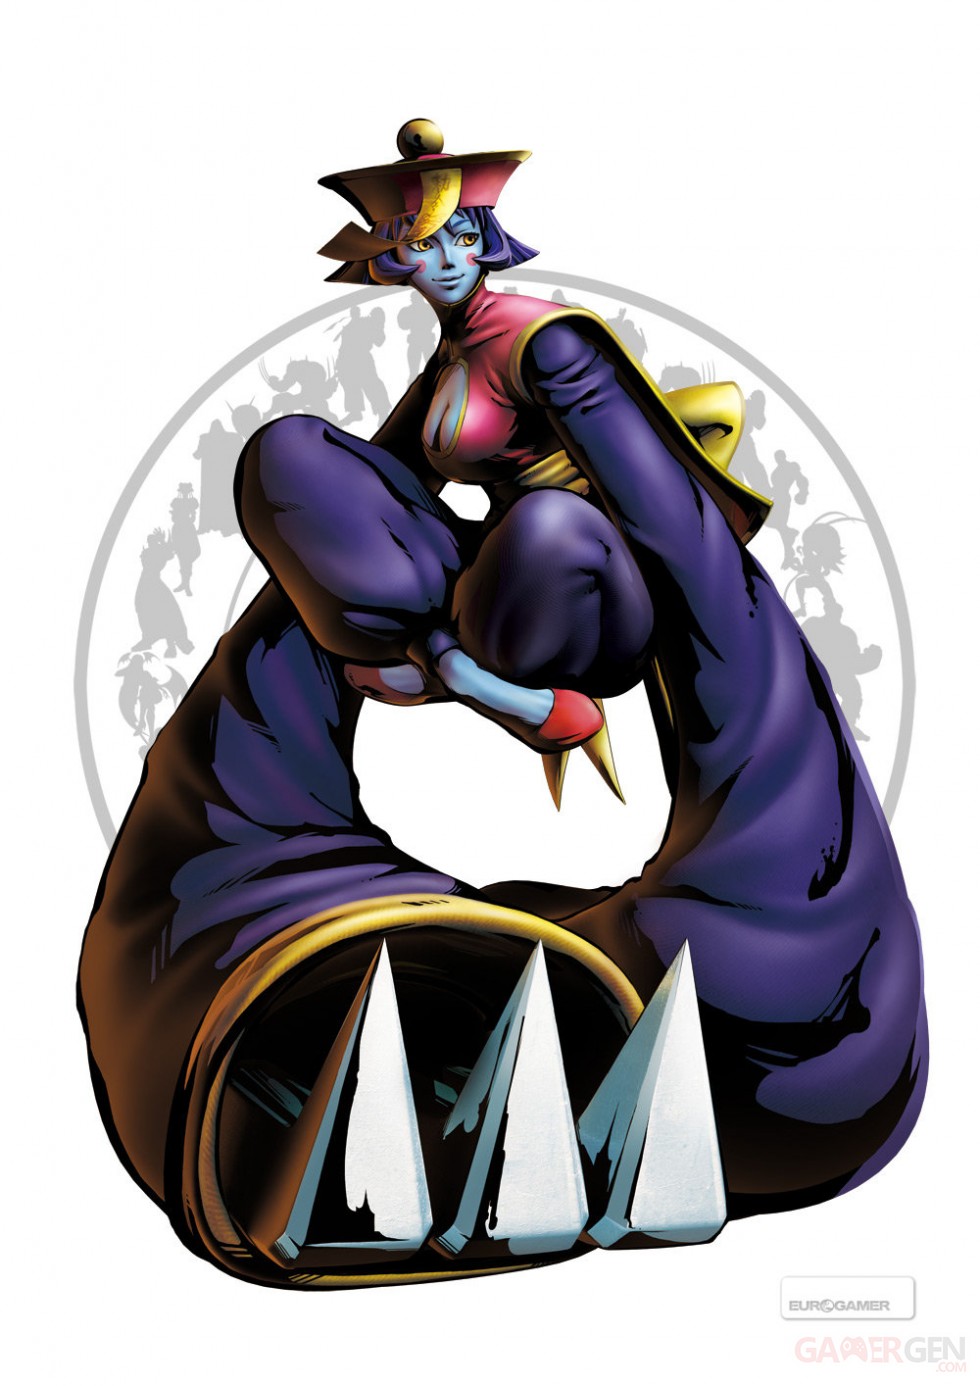 Marvel-vs-Capcom-3-Fate-of-Two-Worlds-Image-280111-01